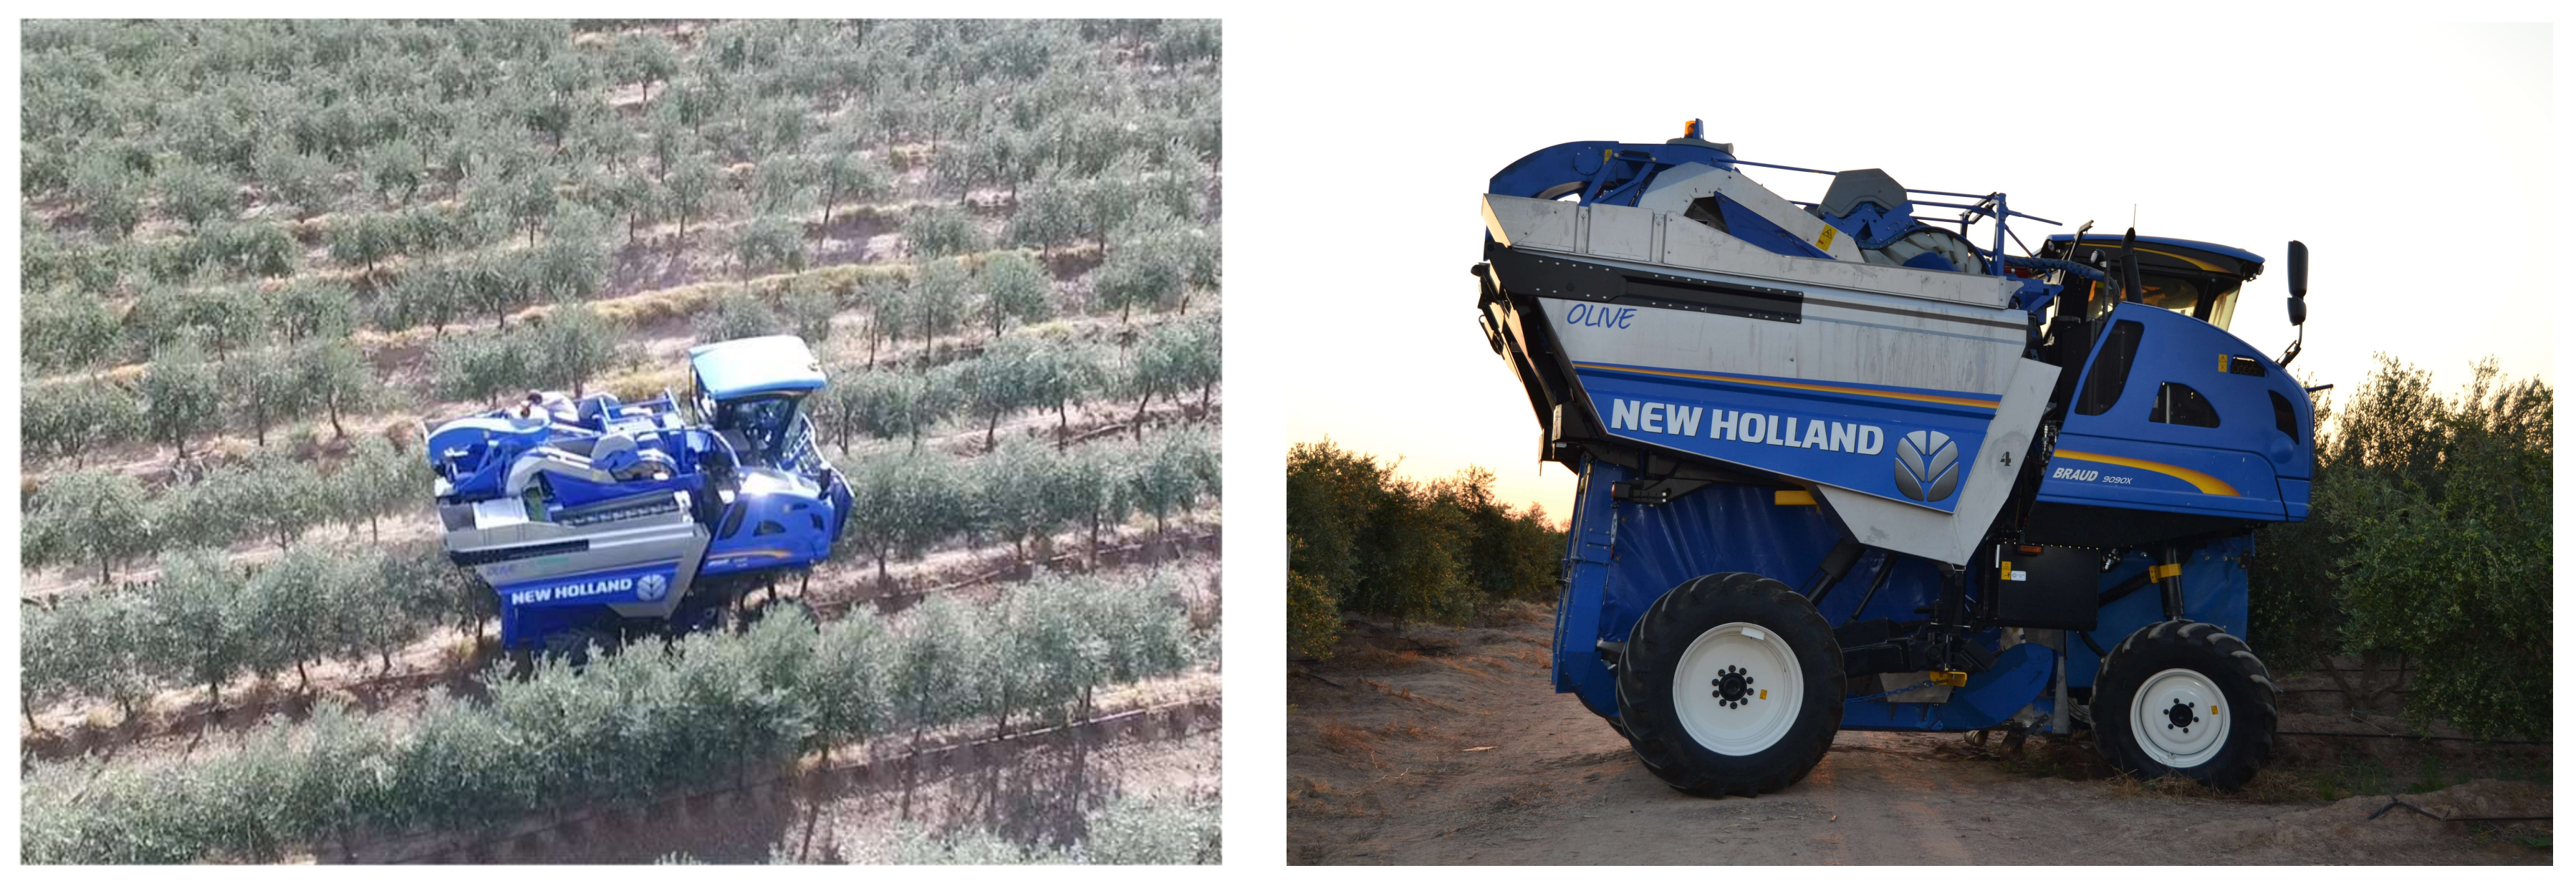 Sensors | Free Full-Text | Evaluation of Over-The-Row Harvester Damage in a  Super-High-Density Olive Orchard Using On-Board Sensing Techniques | HTML